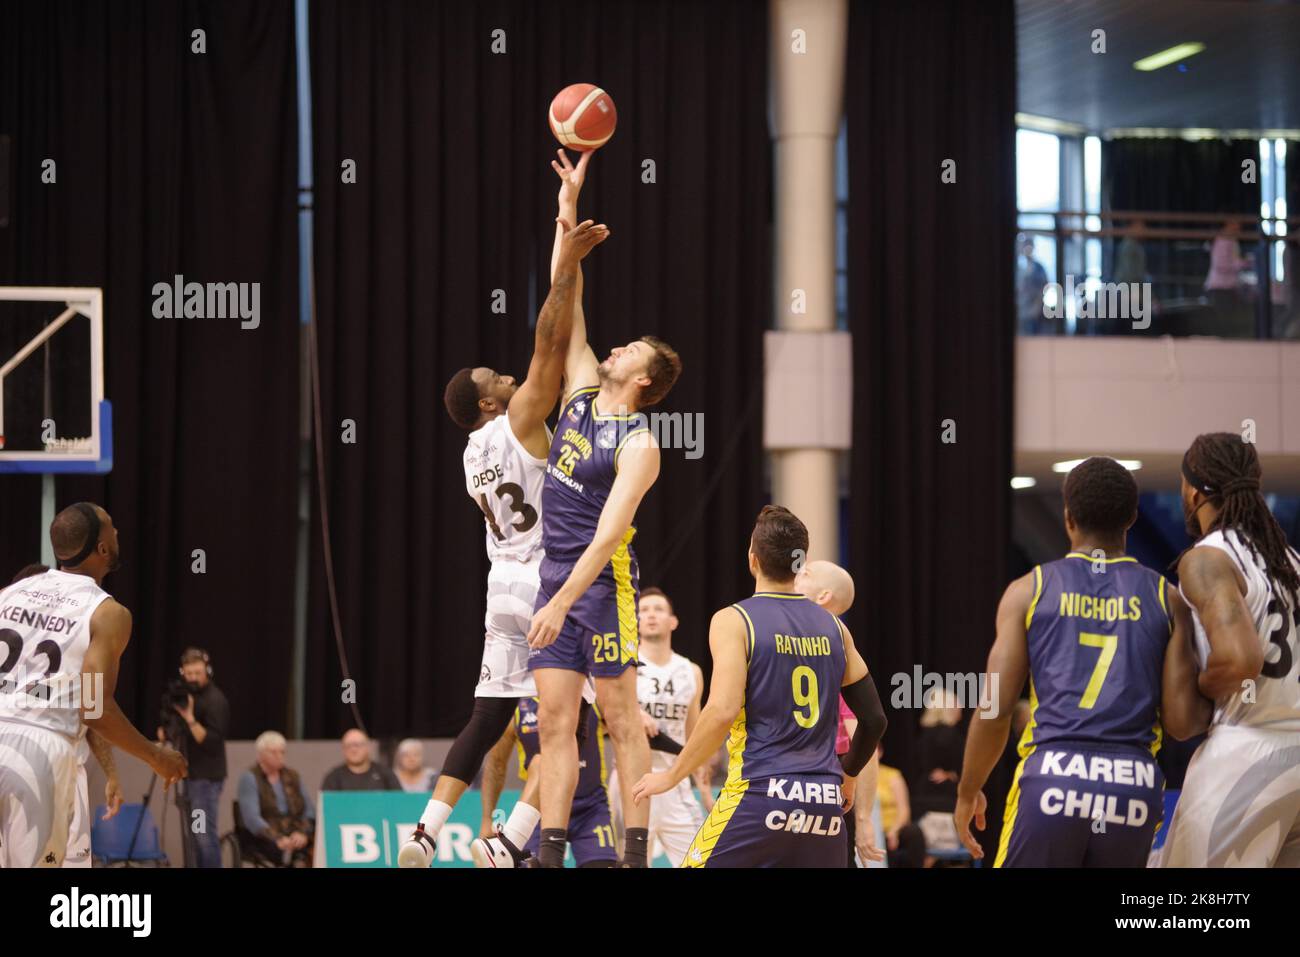 Sheffield, England, 23 October 2022. Tip off in the B. Braun Sheffield Sharks against Newcastle Eagles BBL match at Ponds Forge. Credit: Colin Edwards/Alamy Live News. Stock Photo